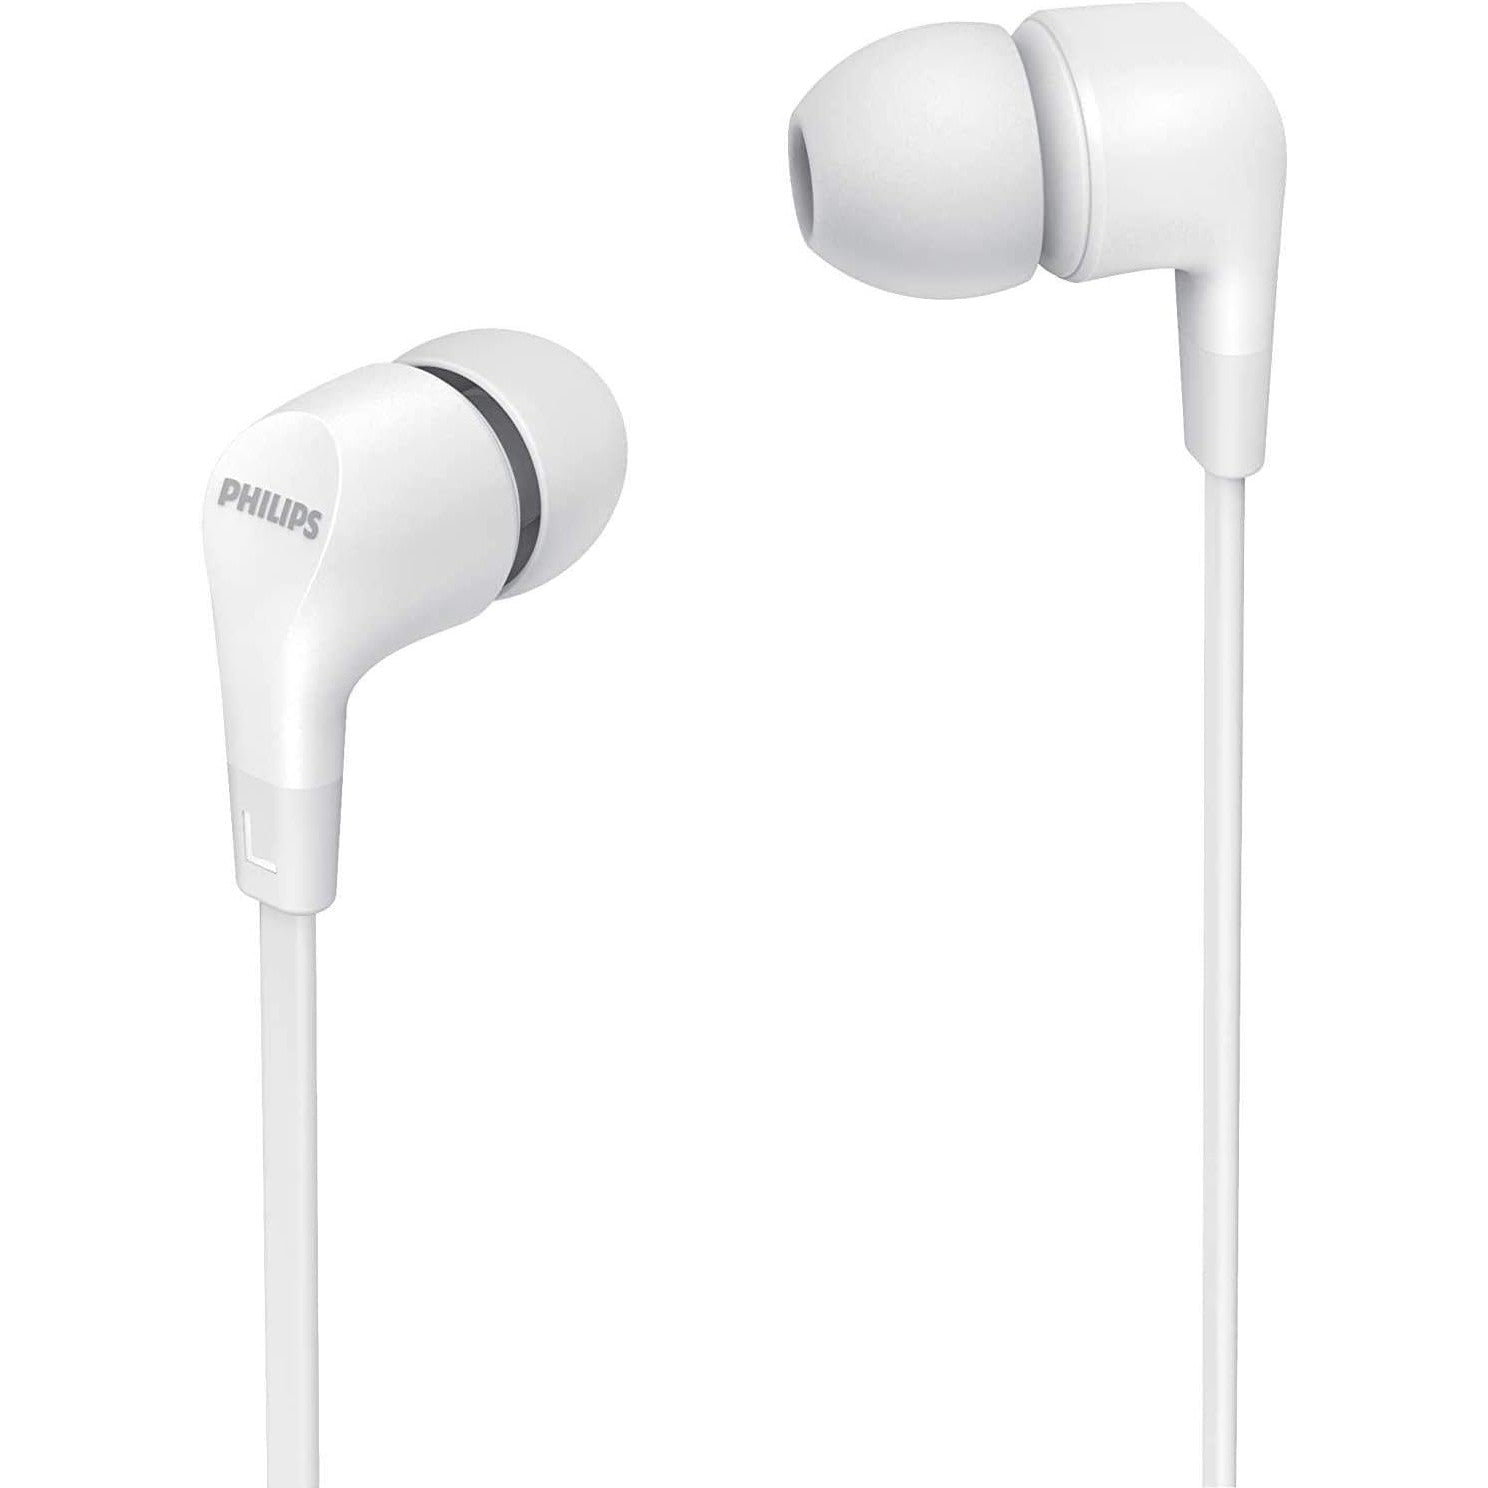 PHILIPS Audio In-Ear Headphones E1105WT/00 With In-Line Remote Control ,White